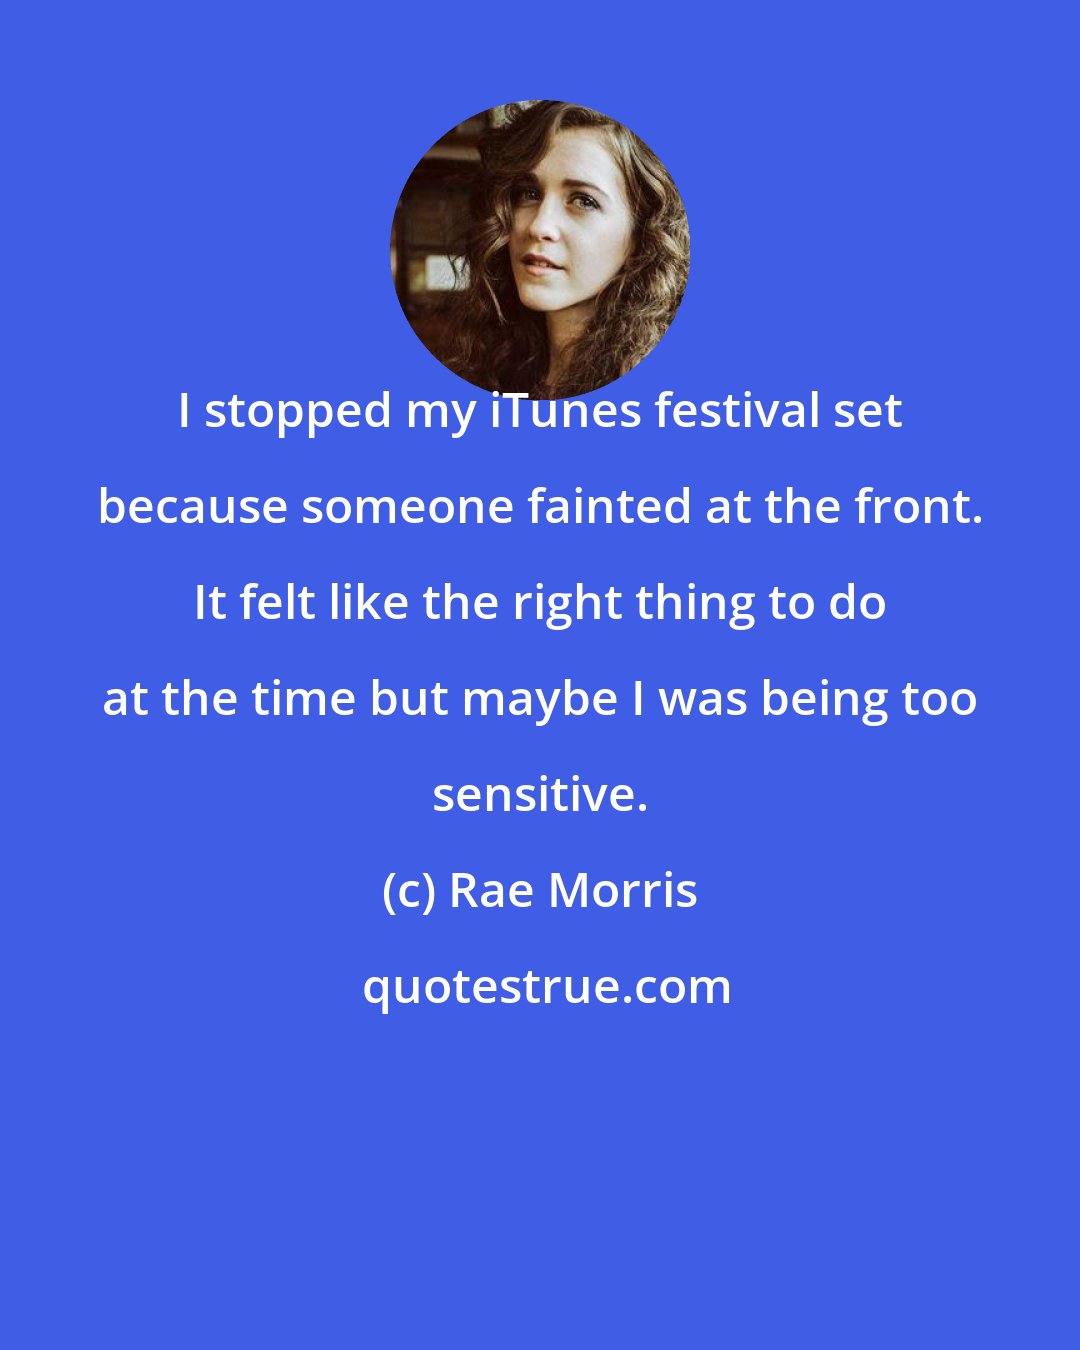 Rae Morris: I stopped my iTunes festival set because someone fainted at the front. It felt like the right thing to do at the time but maybe I was being too sensitive.